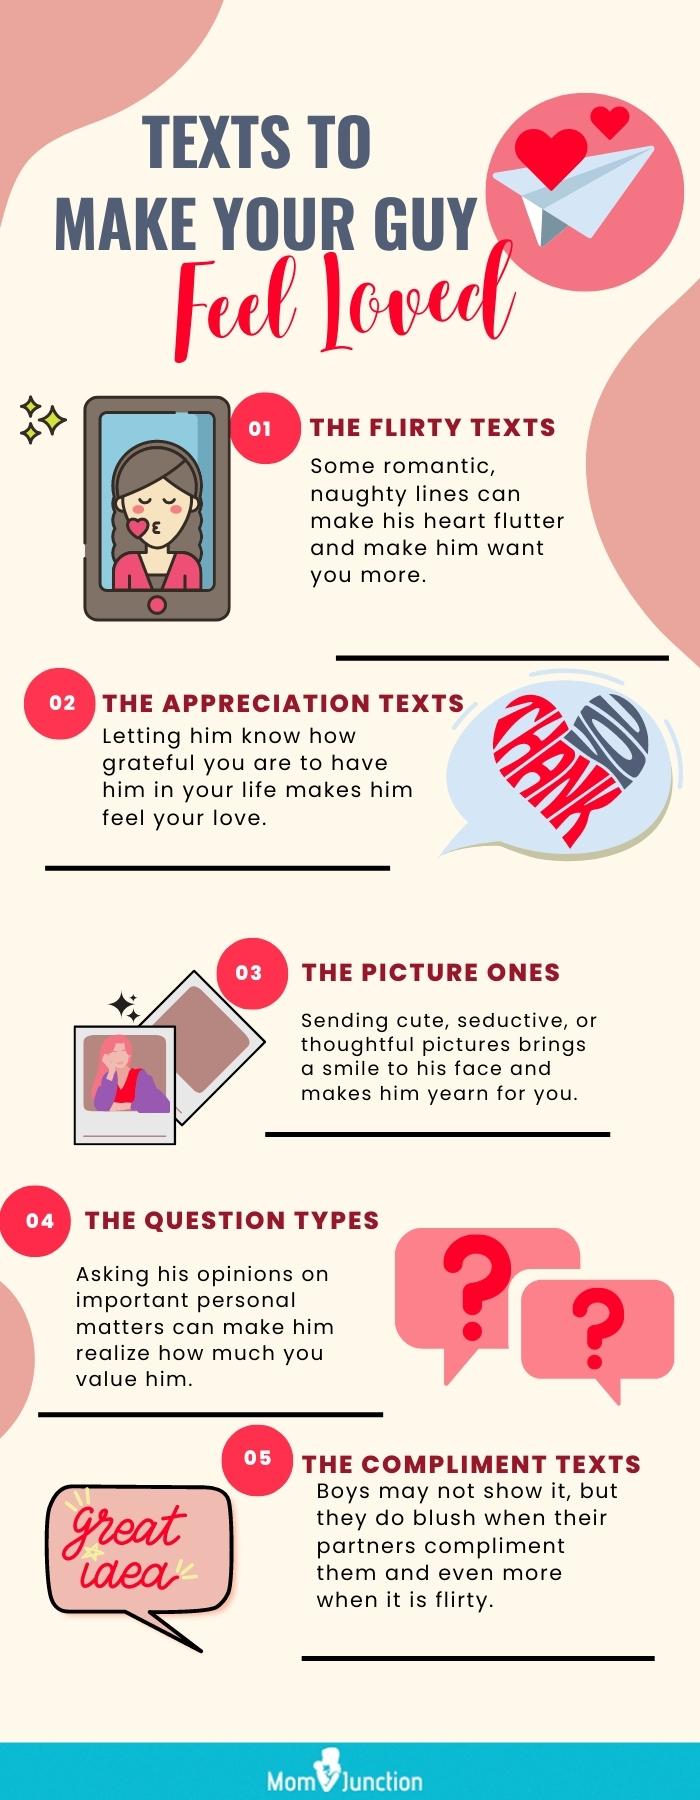 texts to make your guy feel loved [infographic]